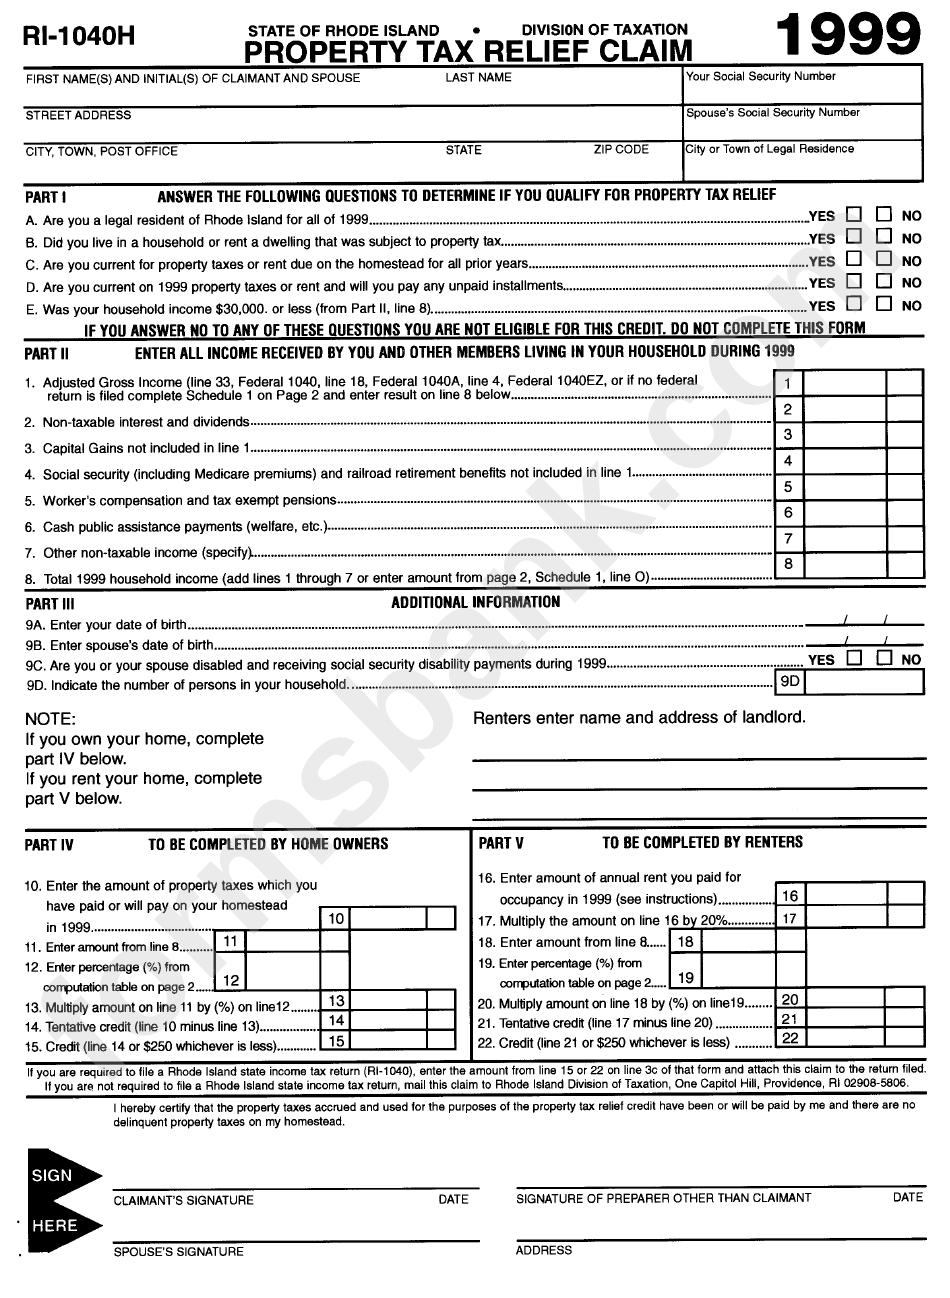 form-ri-1040h-property-tax-relief-claim-1999-printable-pdf-download